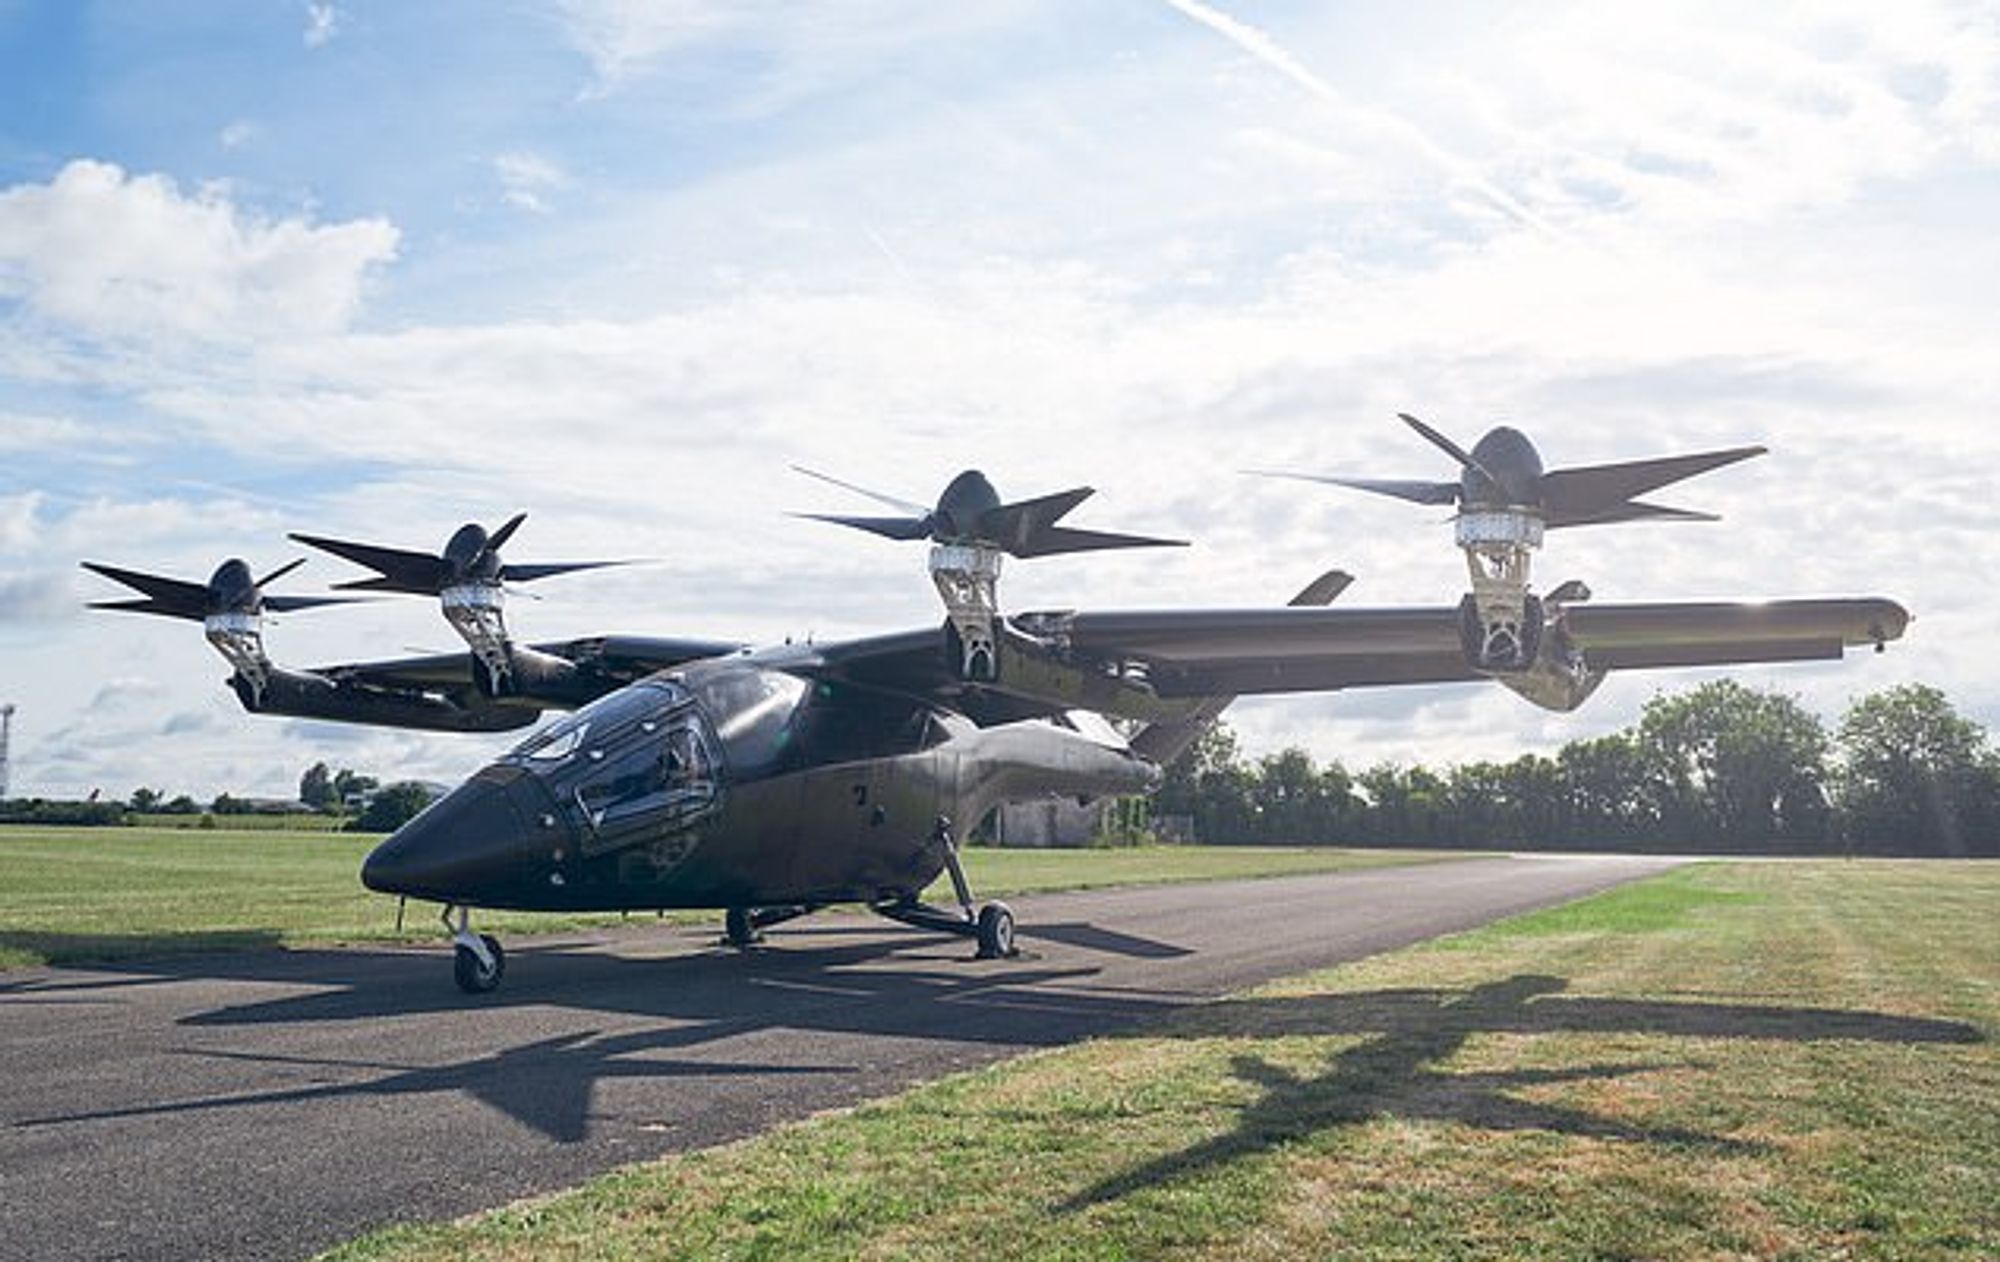 Flying taxi built by UK firm Vertical Aerospace set to fly in coming weeks | This is Money